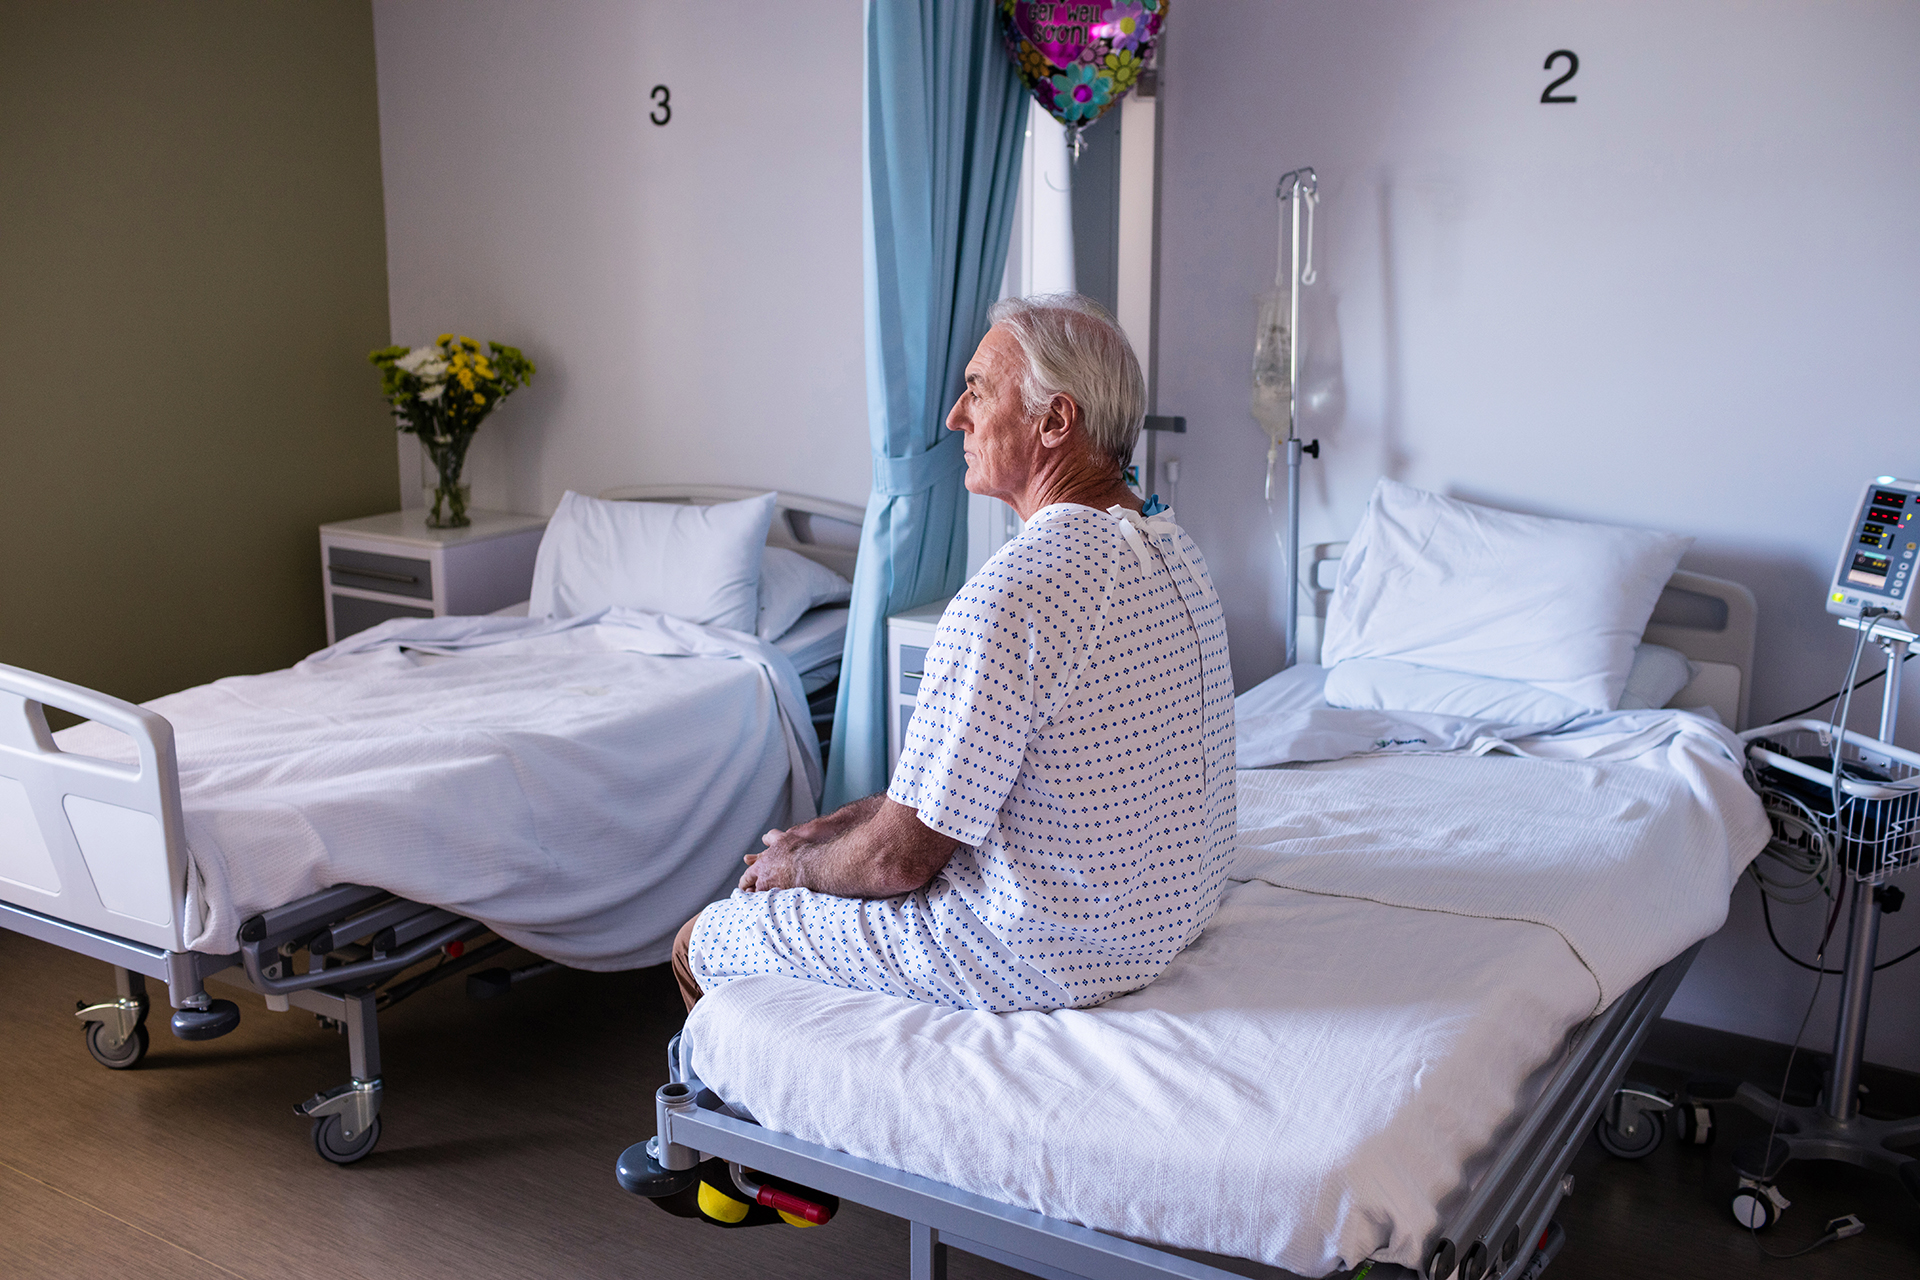 Male senior patient sitting in a hospital ward on a hospital bed